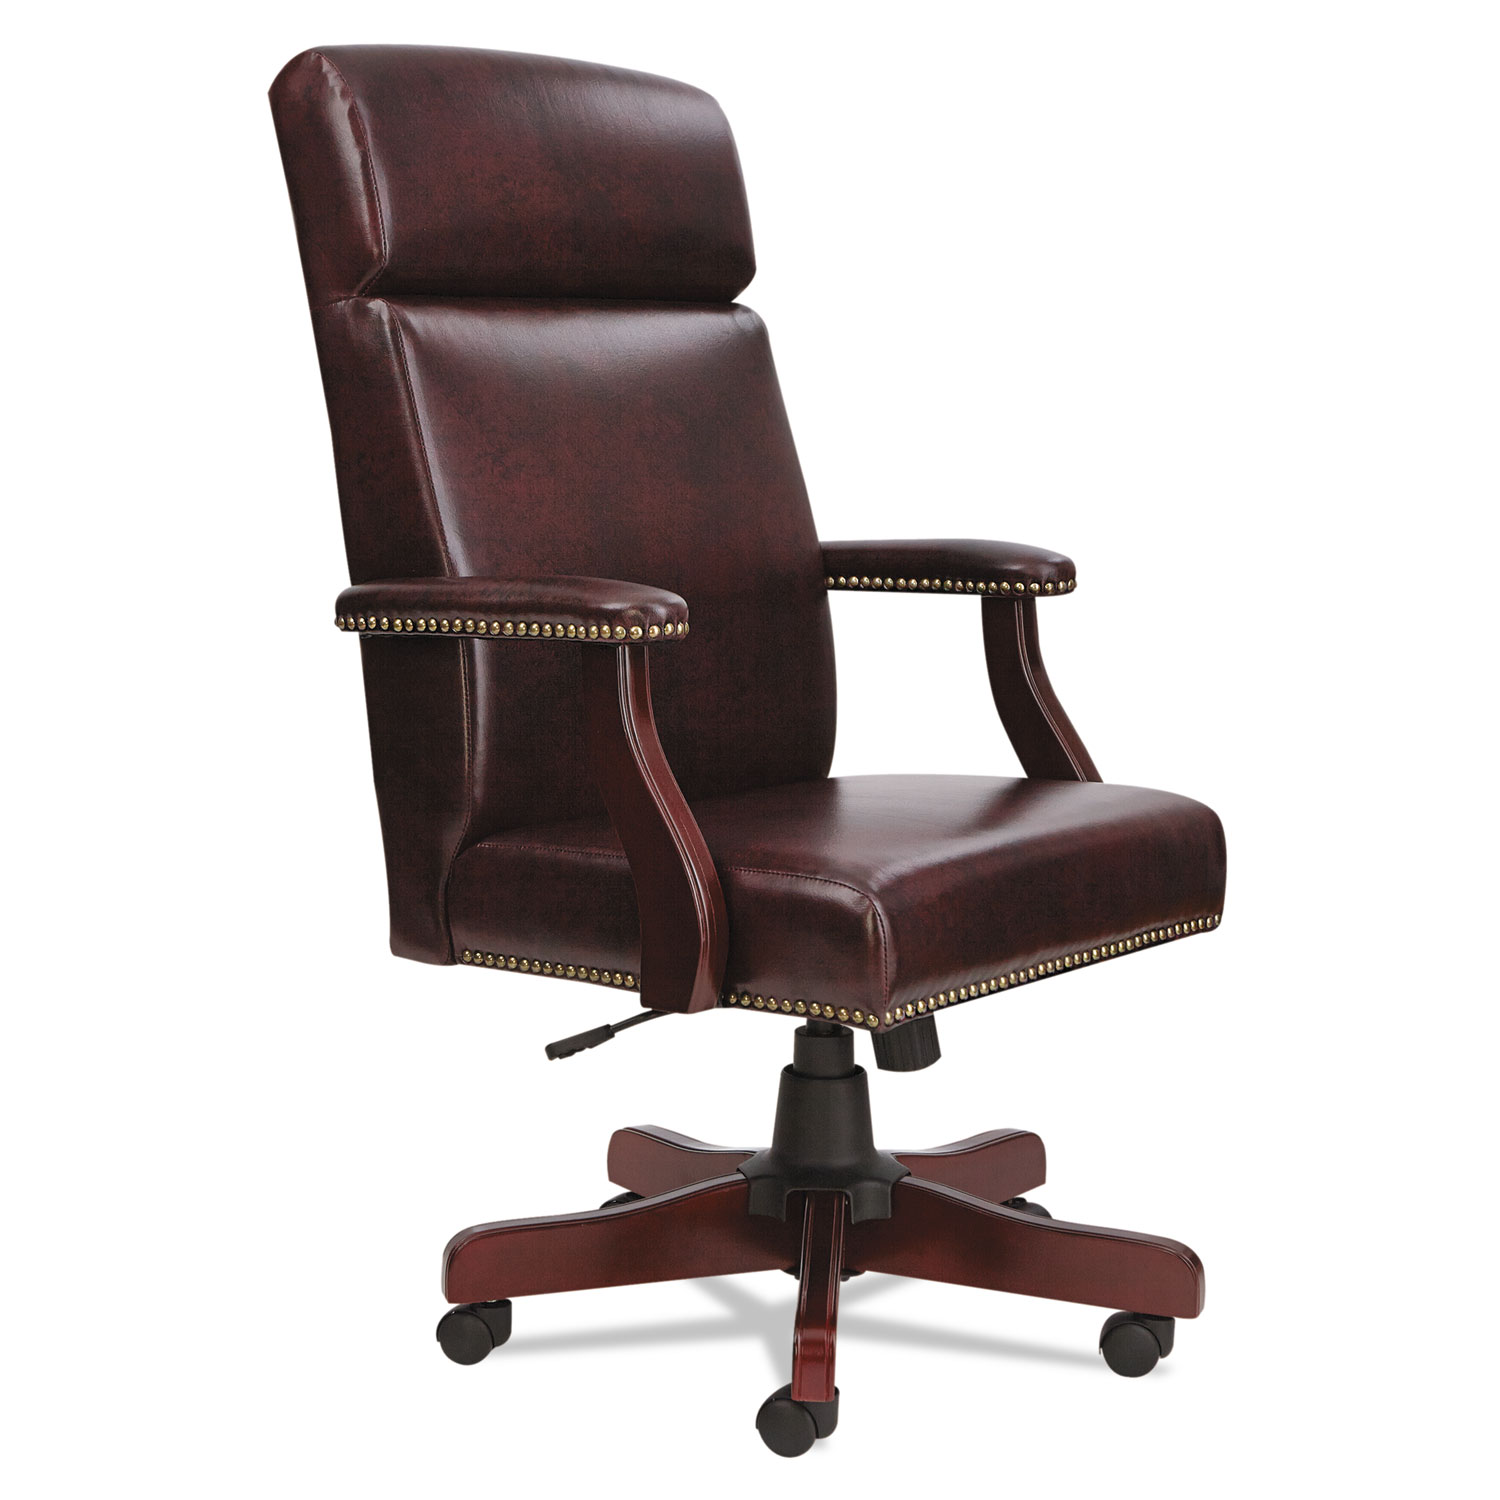  Alera ALETD4136 Alera Traditional Series High-Back Chair, Supports up to 275 lbs., Oxblood Burgundy Seat/Oxblood Burgundy Back, Mahogany Base (ALETD4136) 